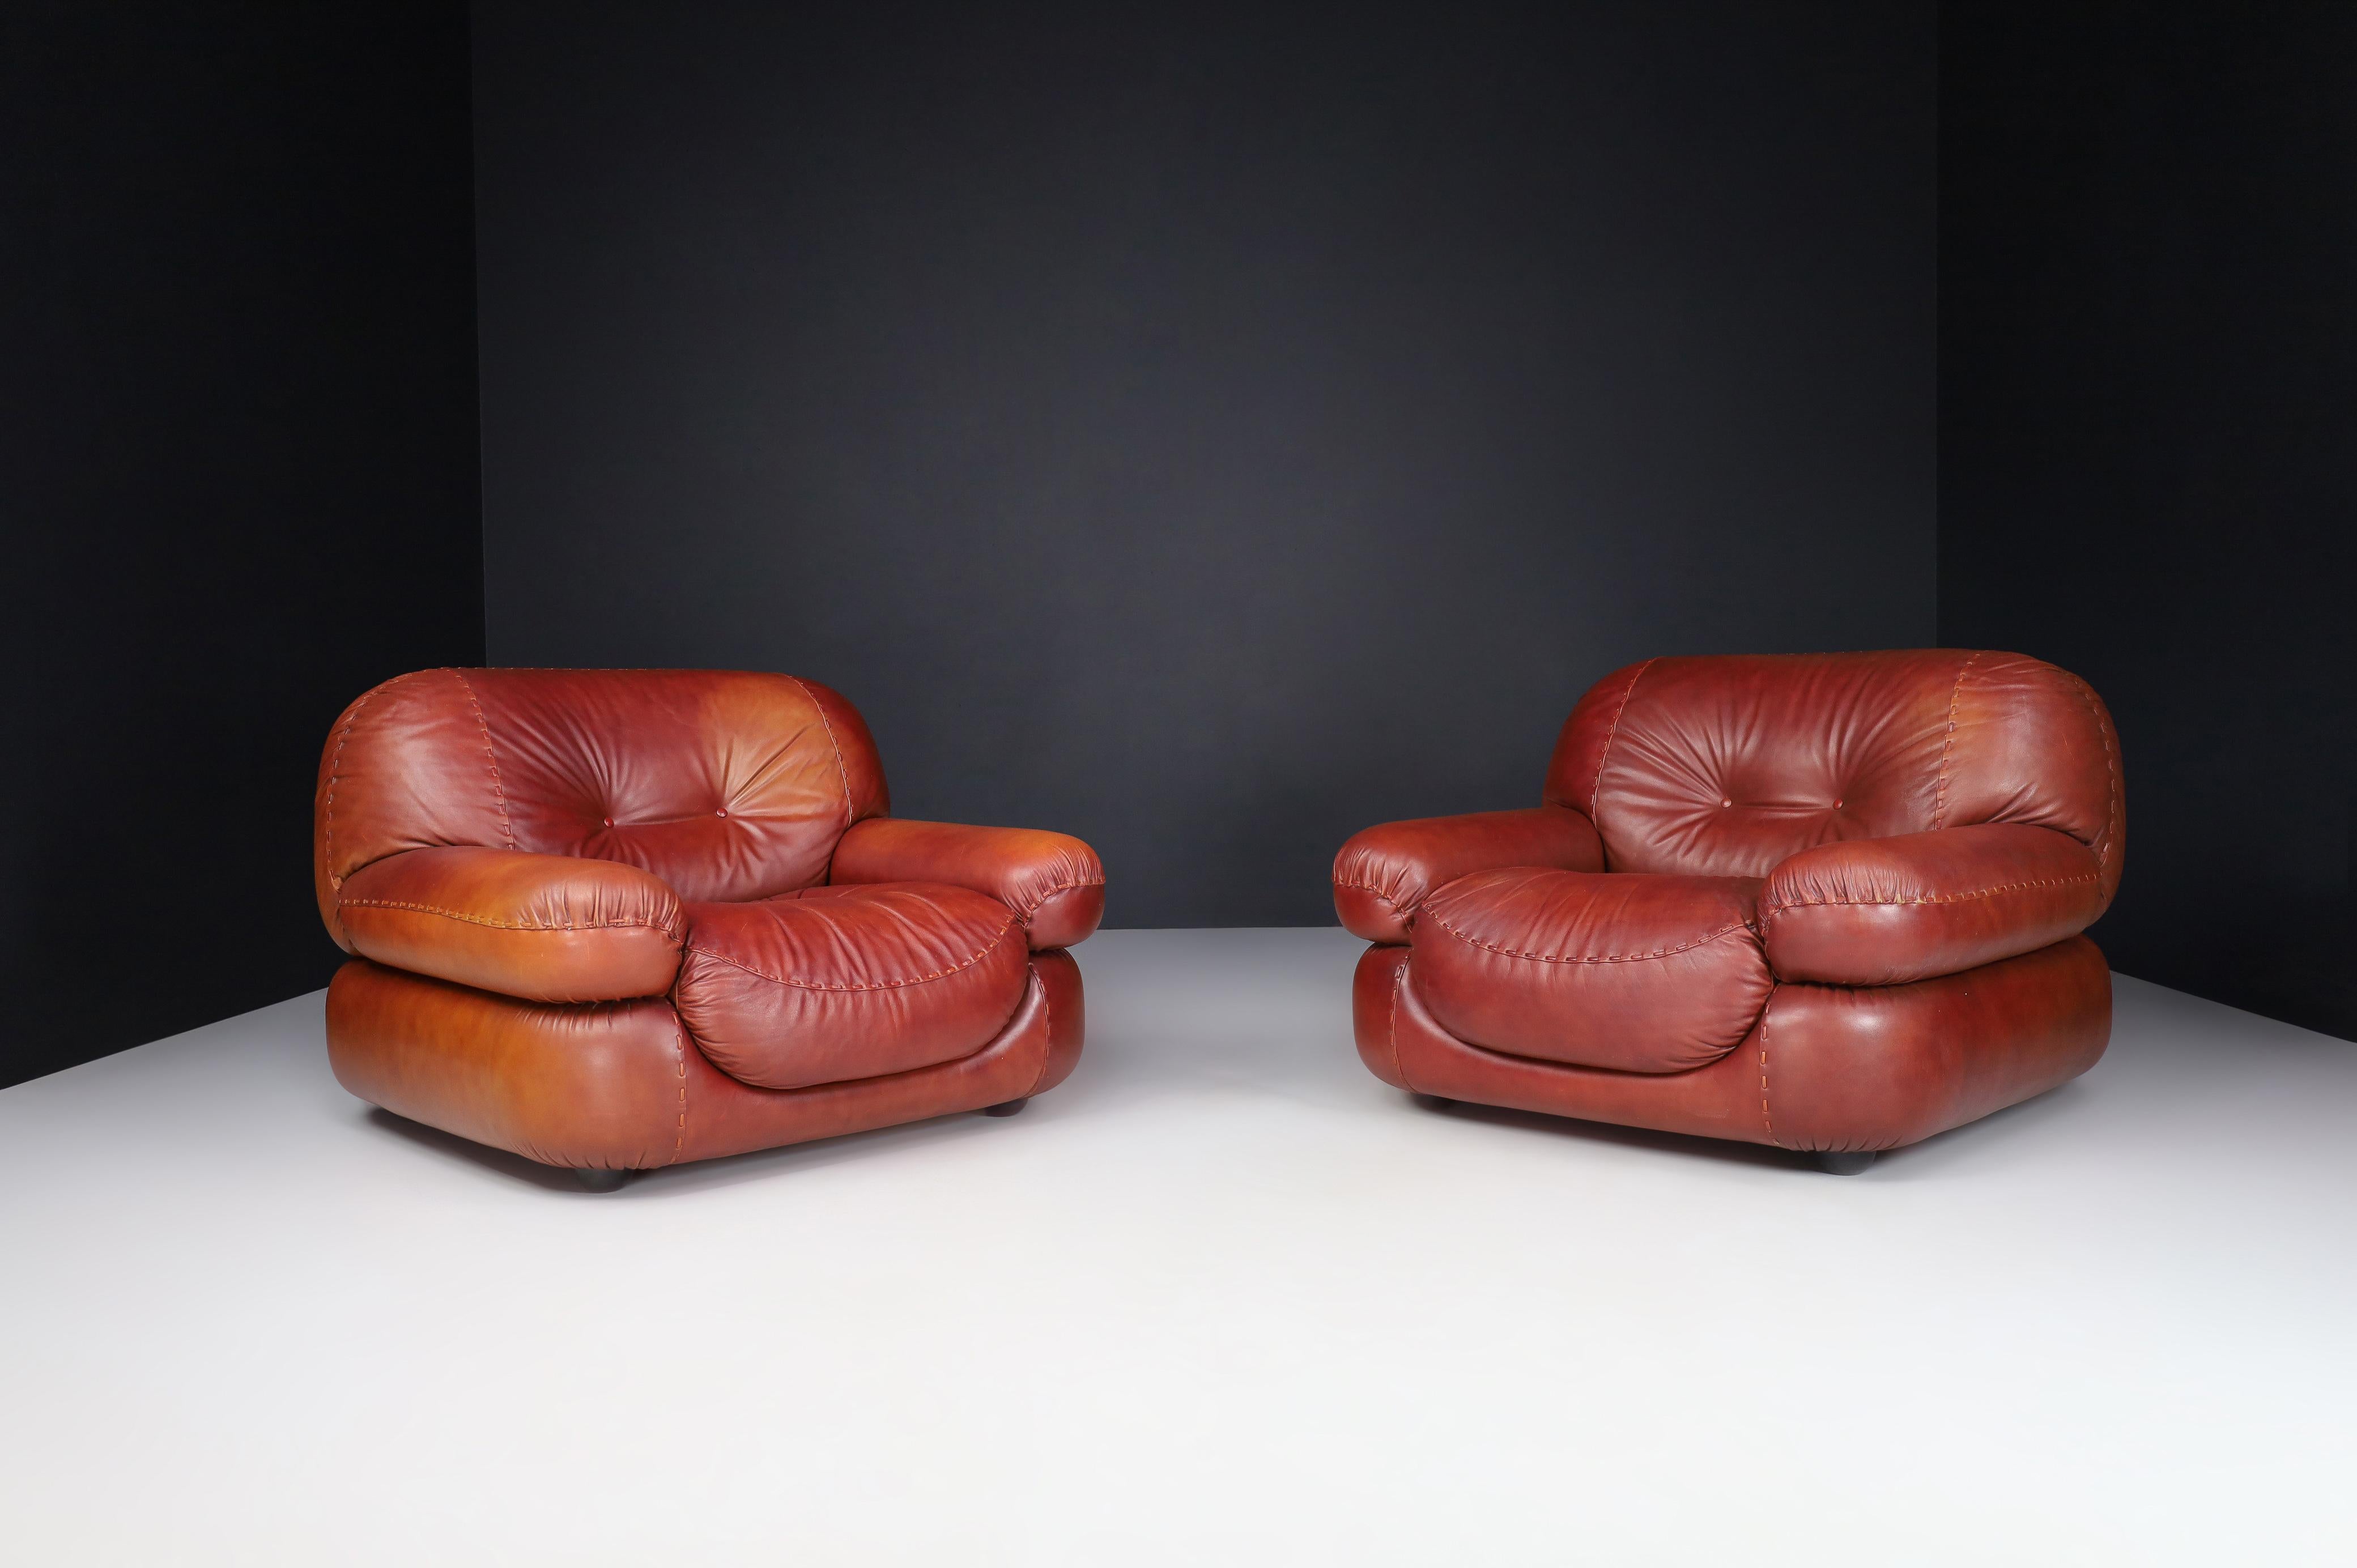 A couple of Lounge Chairs in Patinated Cognac Leather by Sapporo for Mobil Girgi, Italy 1970

A pair of lounge chairs in Patinated cognac leather by Sapporo for Mobil Girgi, Italy, in the 1970s. A couple of big, fluffy, stylish lounge armchairs